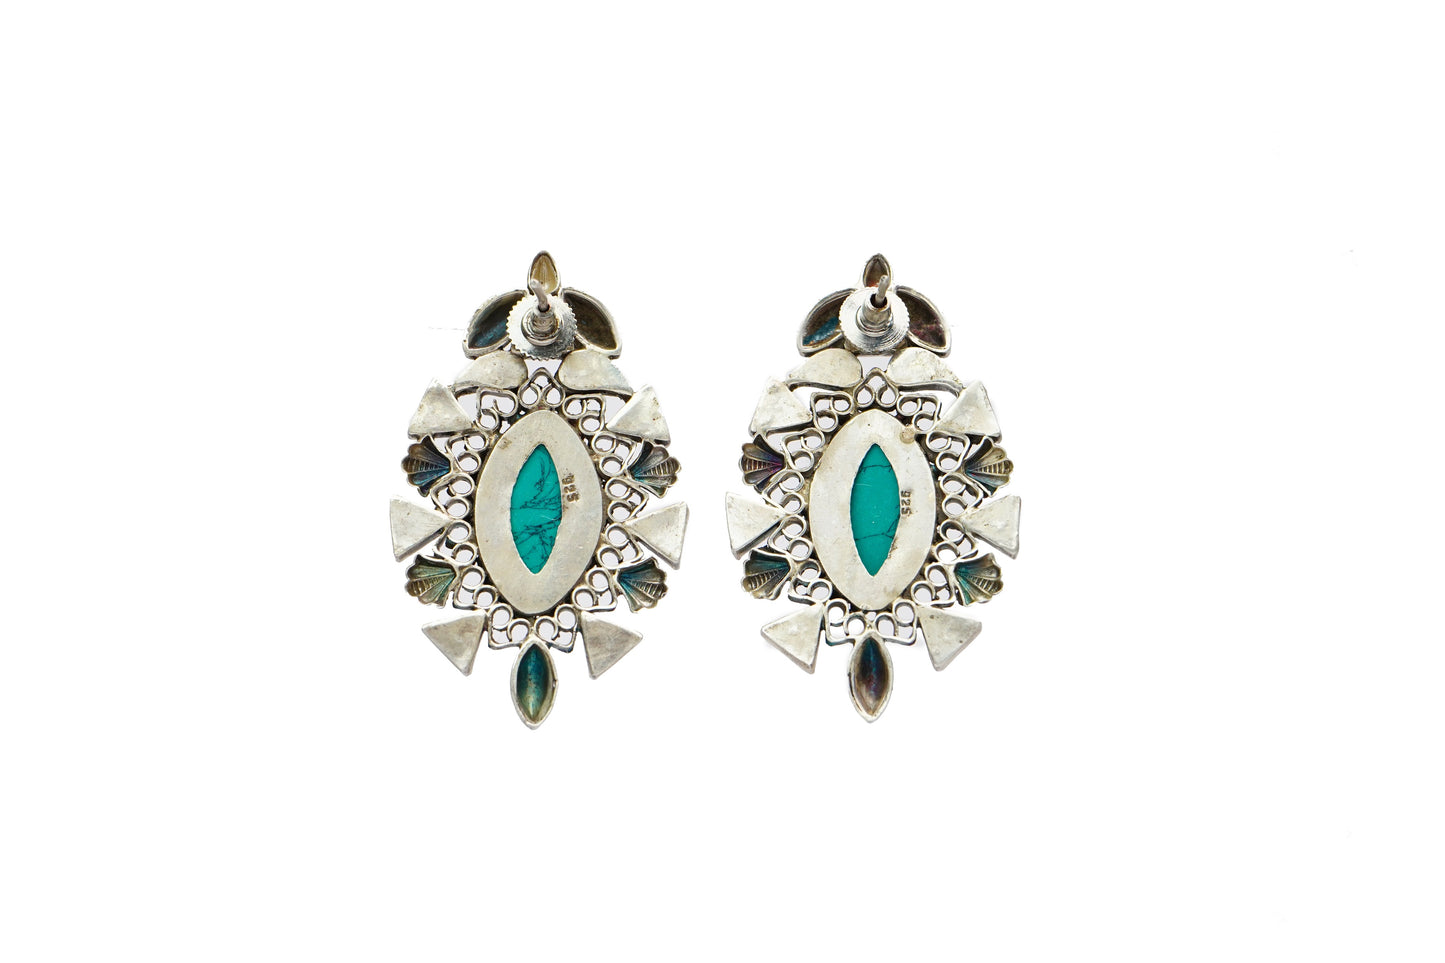 Silver Stud Earrings with Turquoise and Pearls - Neeta Boochra Jewellery